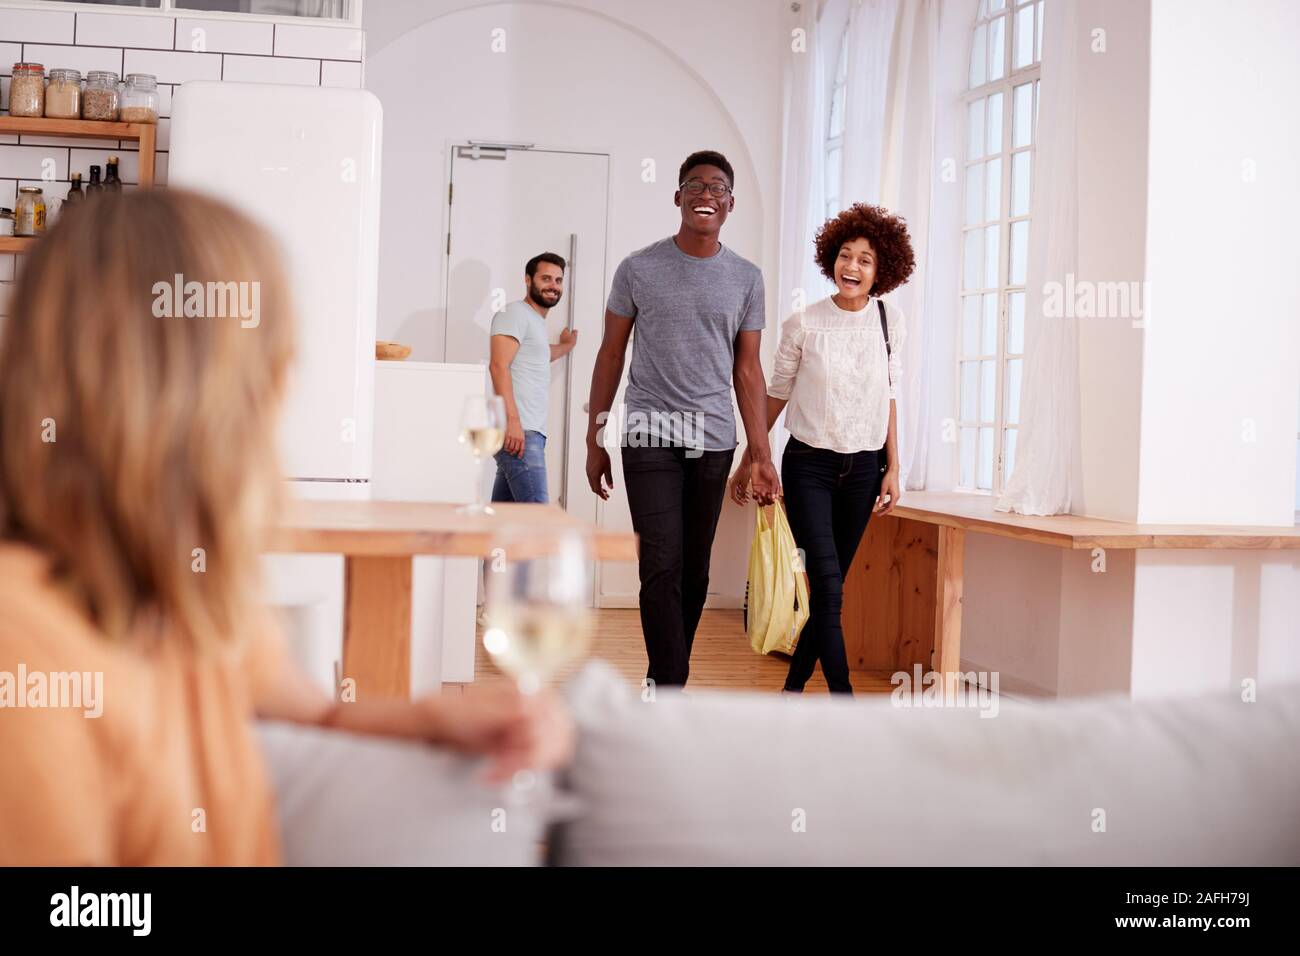 Couple Greeting Friends Arriving For Dinner Party At Home Stock Photo